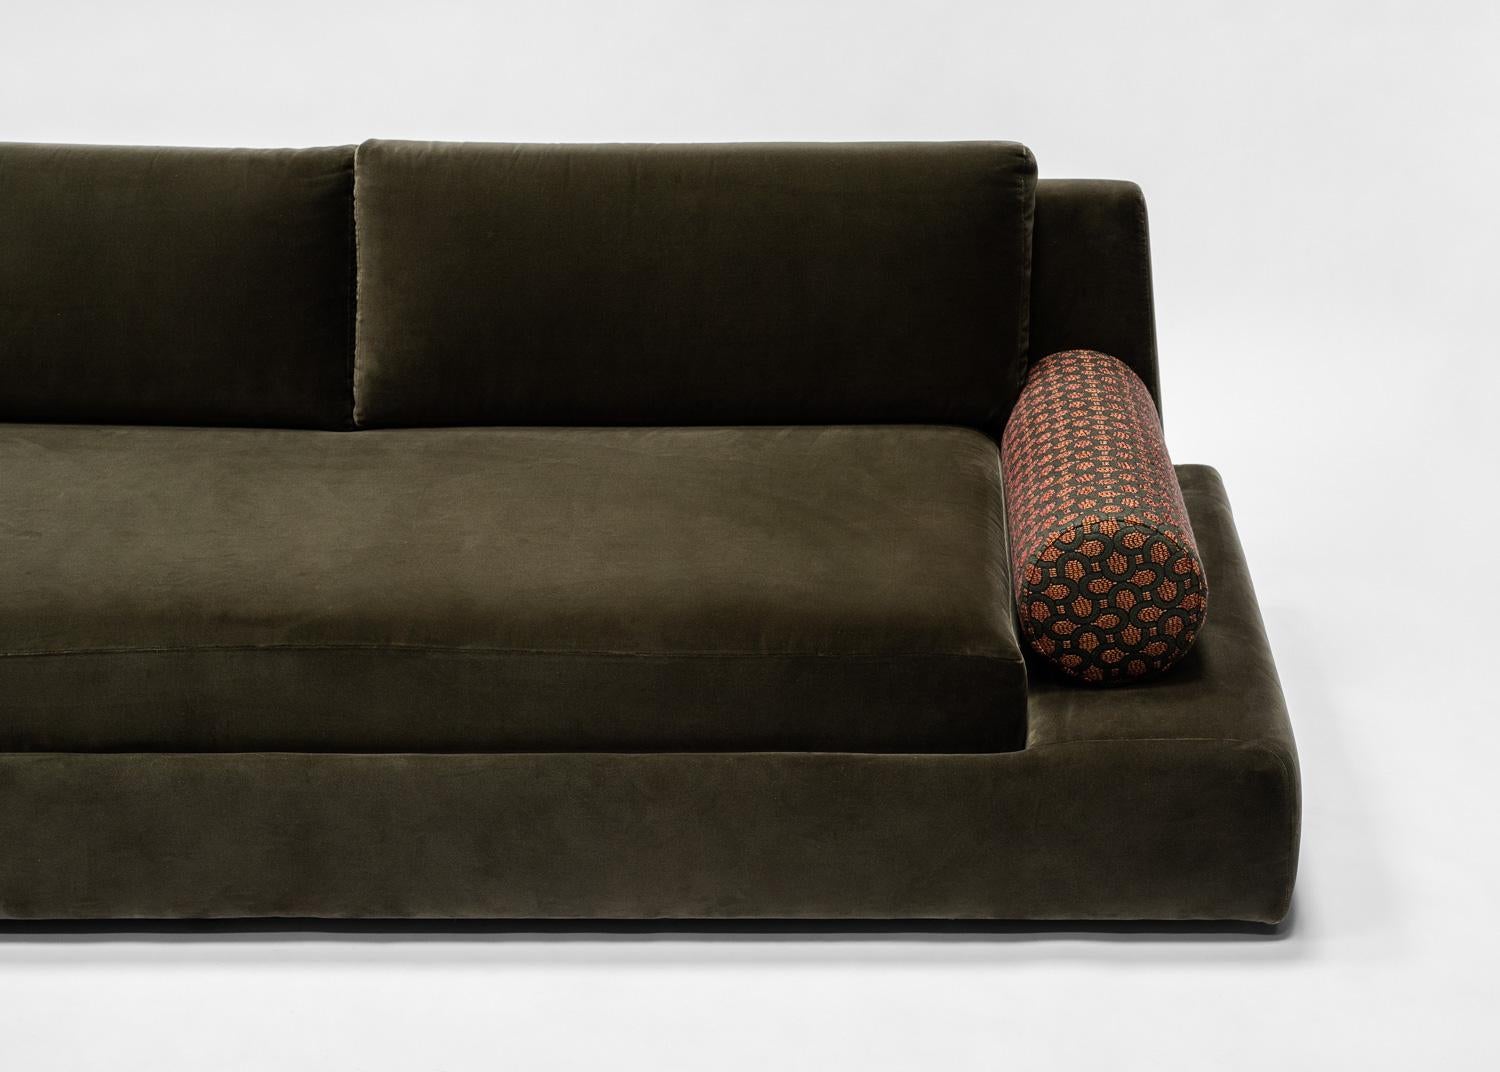 The Podium Sofa by HAUVETTE MADANI.  Handmade in Italy, the Podium Sofa is available in COM and is made to order.  HAUVETTE MADANI is a design studio founded by Samantha Hauvette and Lucas Madani, who have been working on high-end projects in France